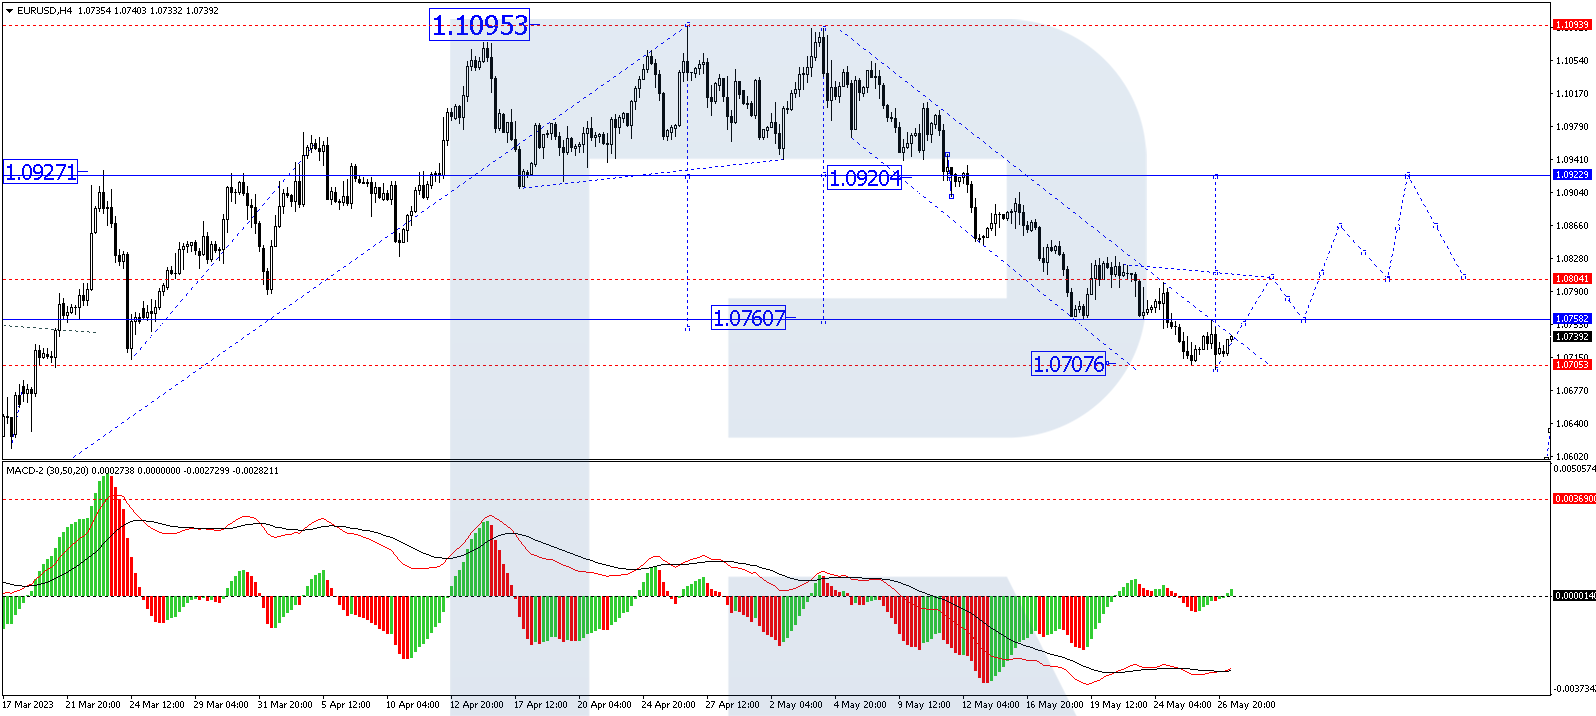 On the H4 timeframe, EUR/USD has completed a downward wave, reaching 1.0701